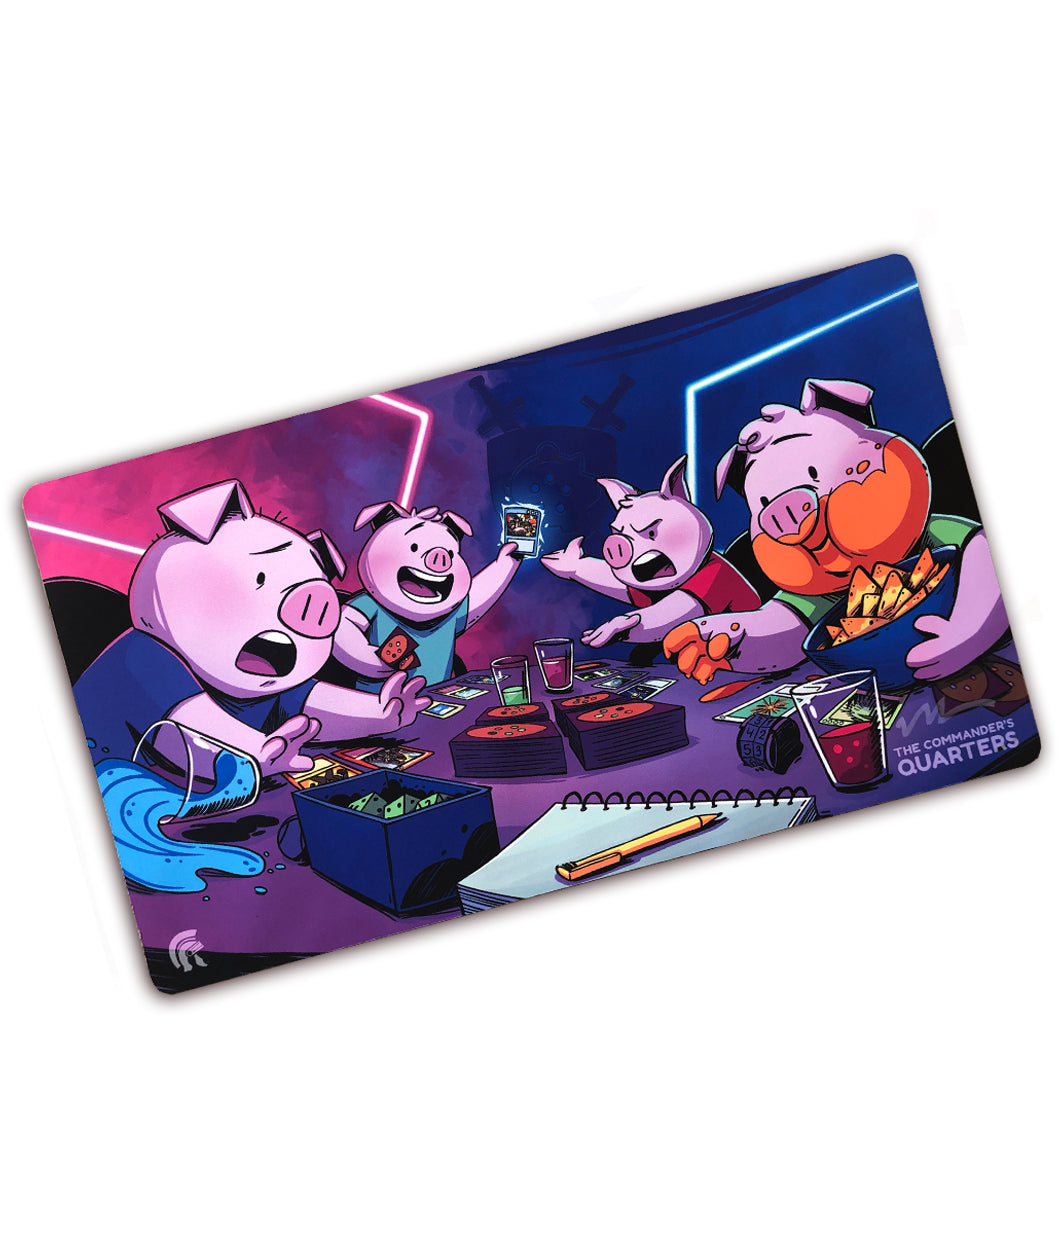 A rectangular playmat with curved edges. An image on the playmat shows four anthropomorphized pigs playing cards, each with a different exaggerated expression. The table is cluttered and the background has neon lights. “The Commander’s Quarters” is in the bottom right in gray sans serif font - from the Commander’s Quarters